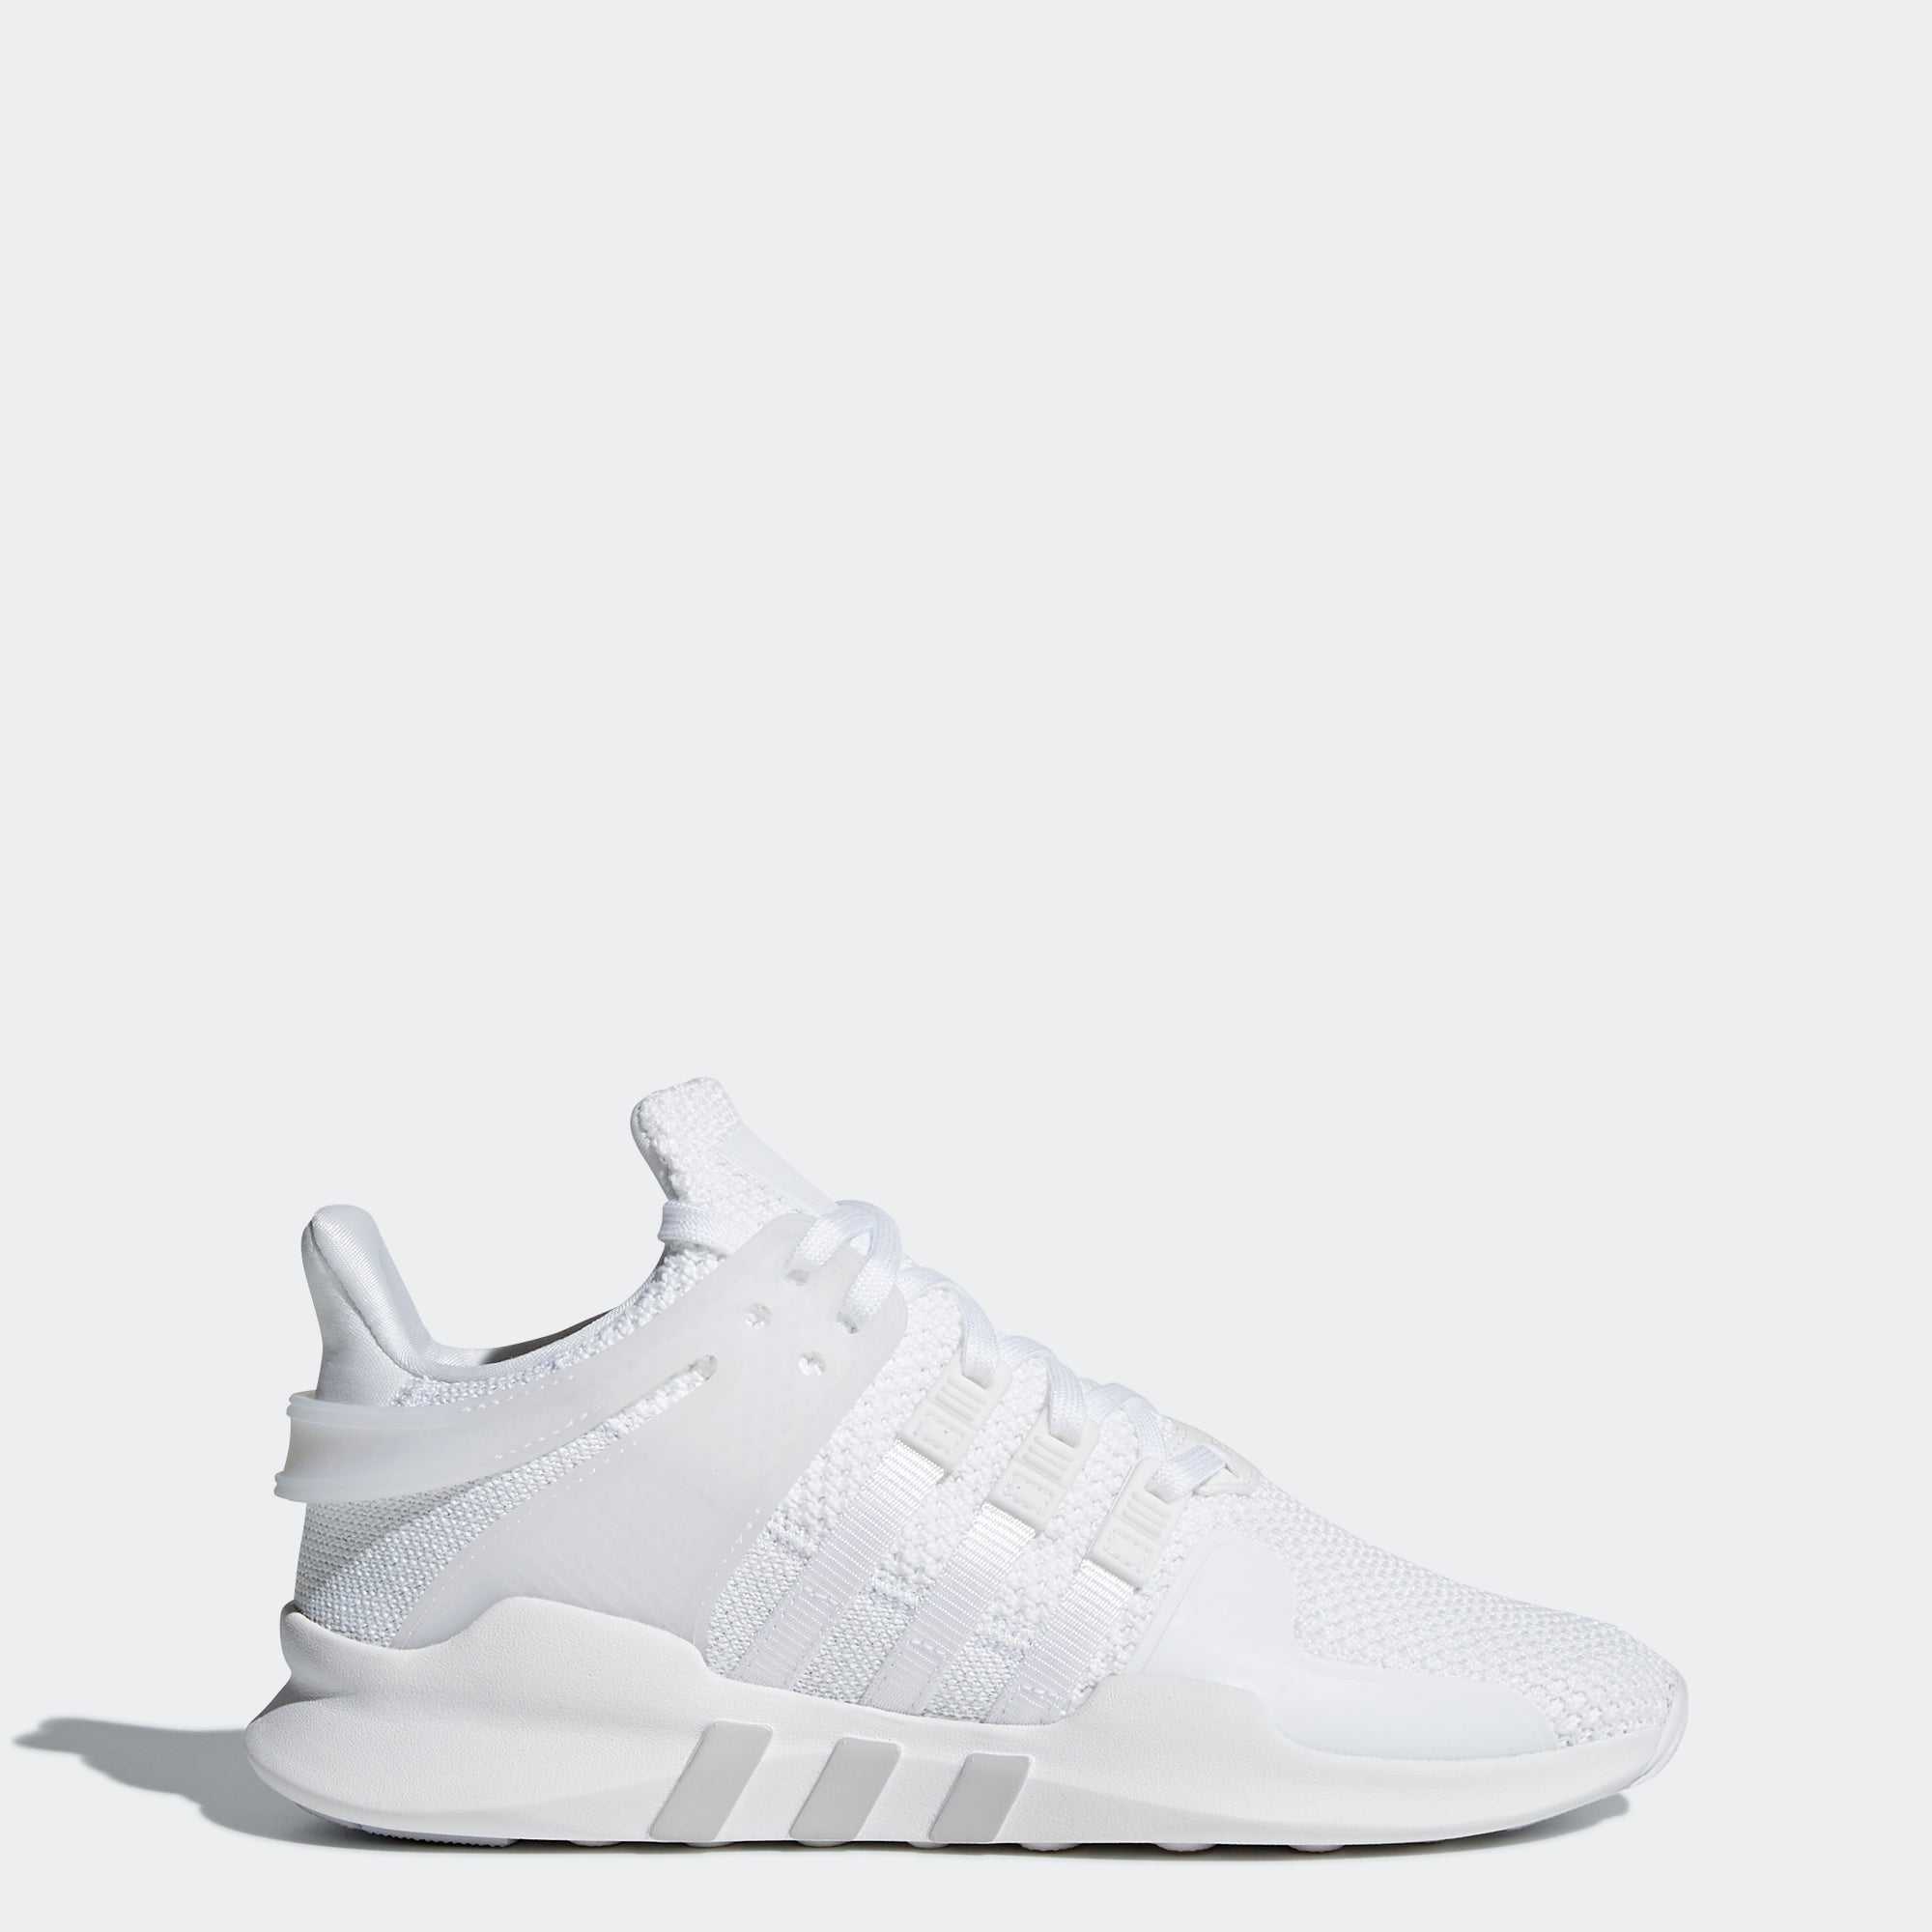 adidas eqt support adv shoes women's